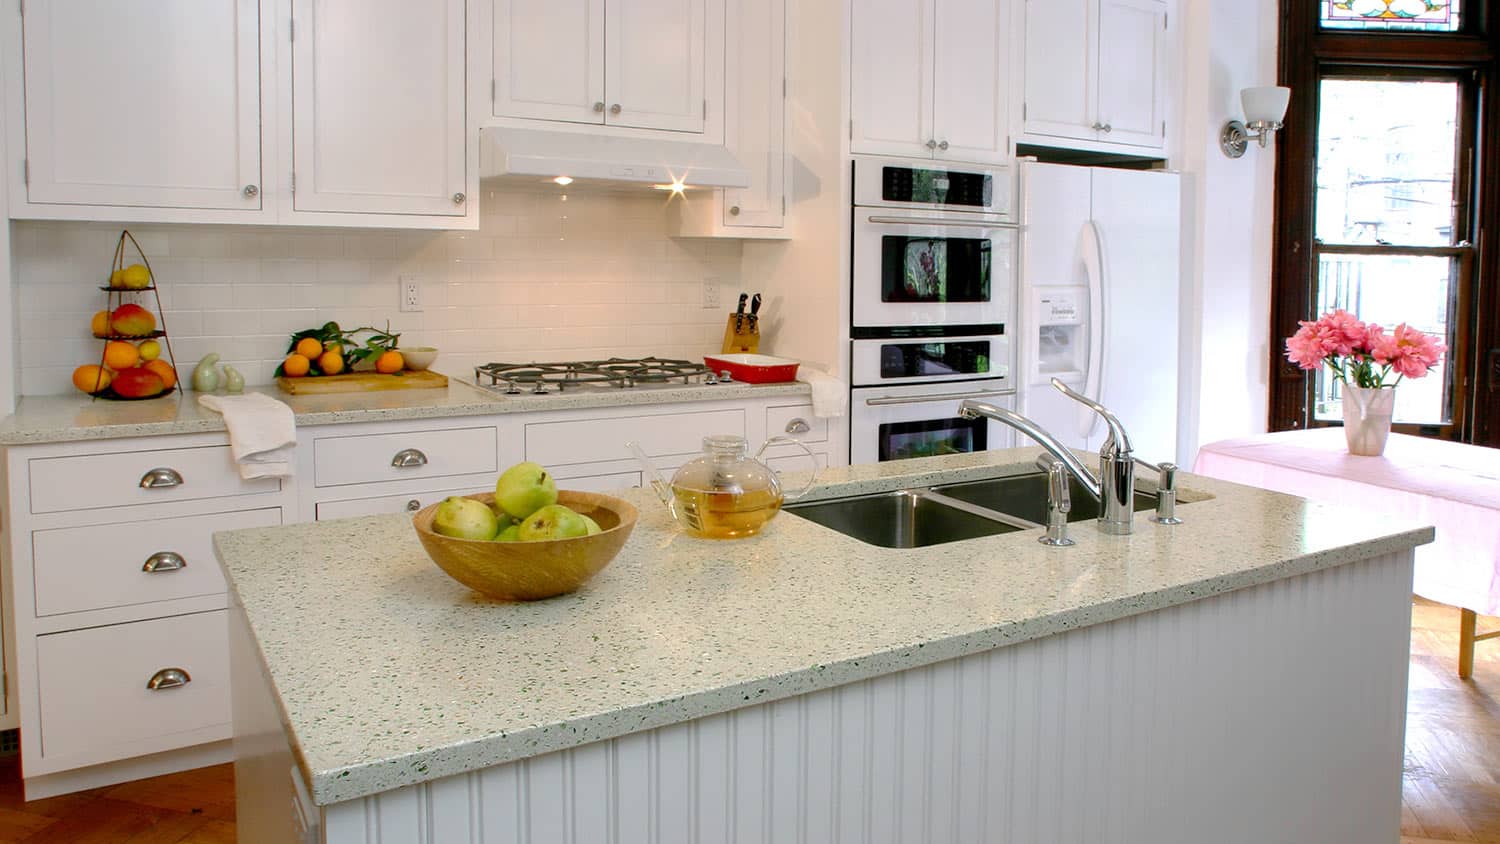 The Pros of Matching countertops and flooring